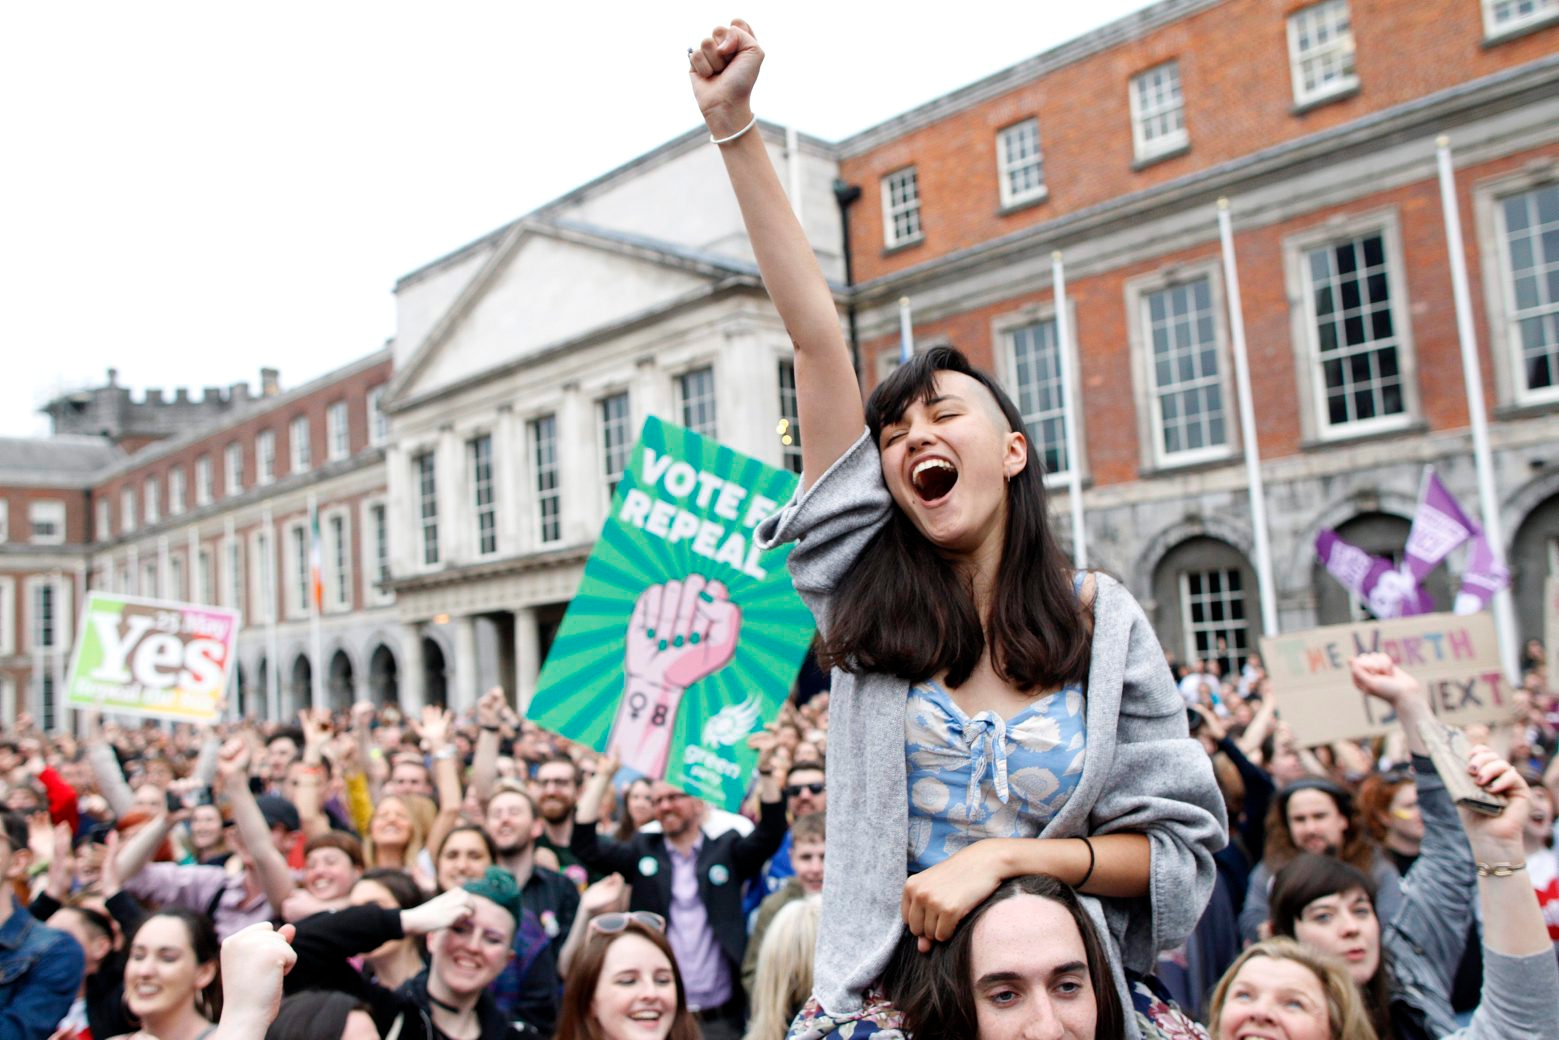 A woman from the"Yes" campaign reacts after the final result was announced, after the Irish referendum on the 8th Amendment of the Irish Constitution at Dublin Castle, in Dublin, Ireland, Saturday May 26, 2018. The prime minister of Ireland says the passage of a referendum paving the way for legalized abortions is a historic day for his country and a great act of democracy. (AP Photo/Peter Morrison) APTOPIX Ireland Abortion Referendum